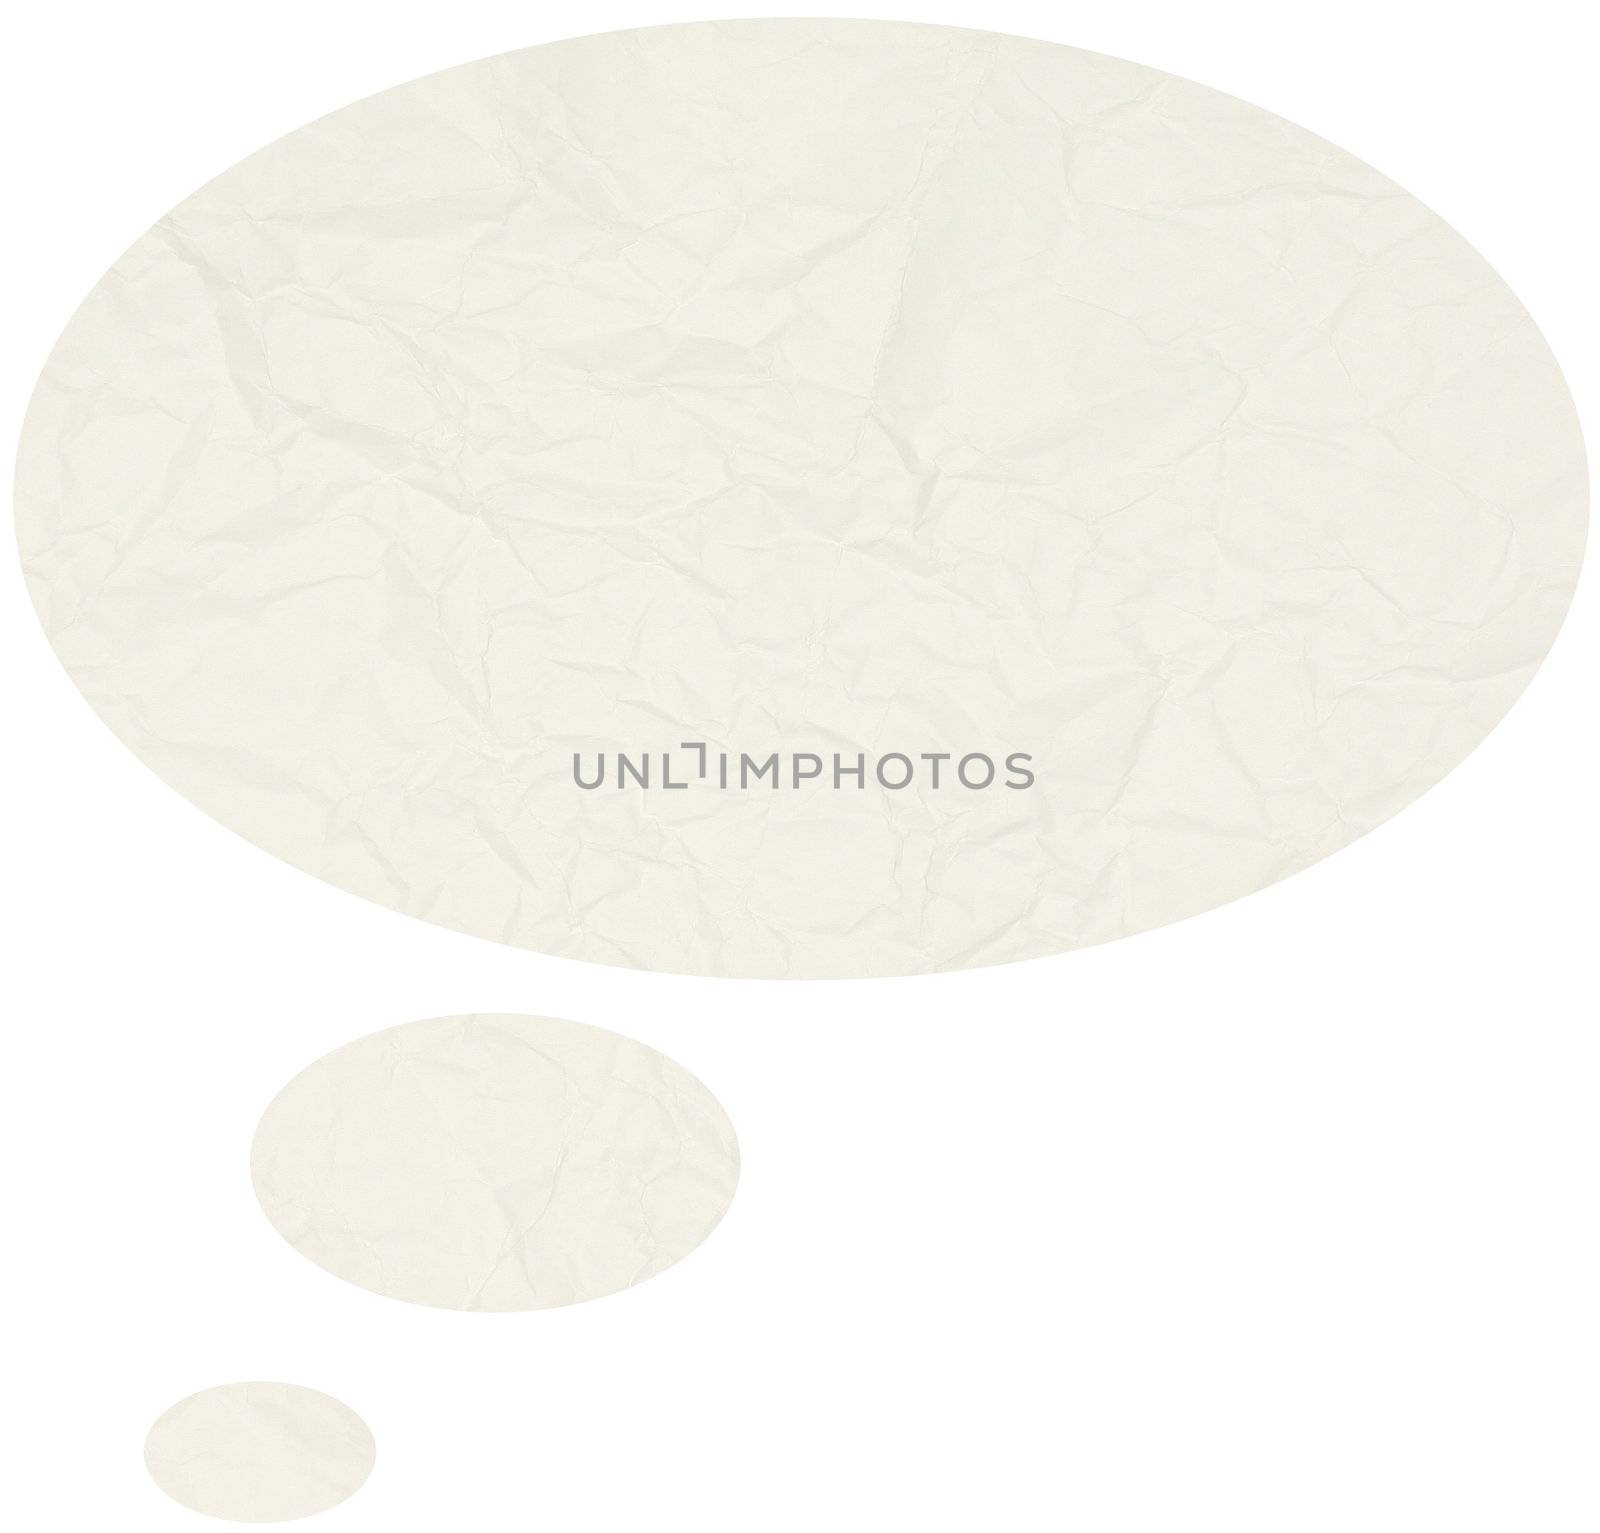 Crumpled comic thought bubble isolated in white